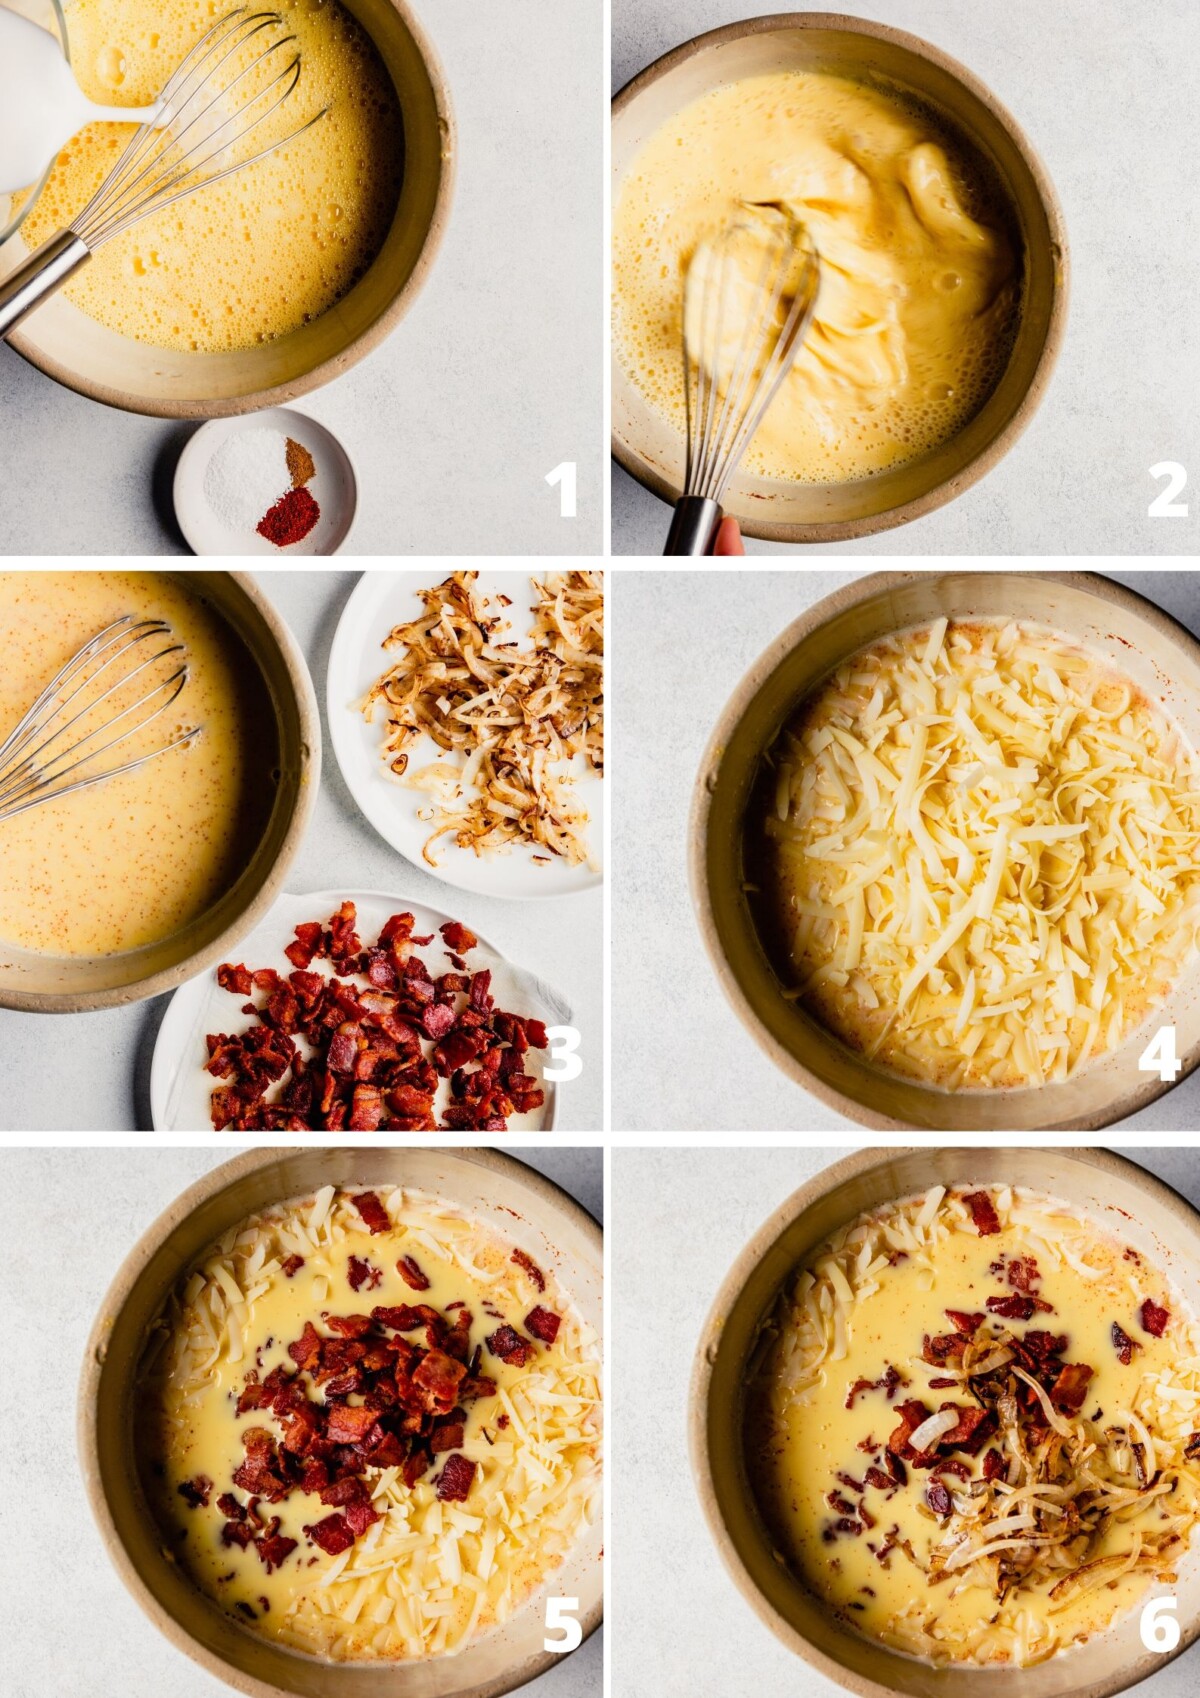 grid of images showing step-by-step process for making crustless quiche